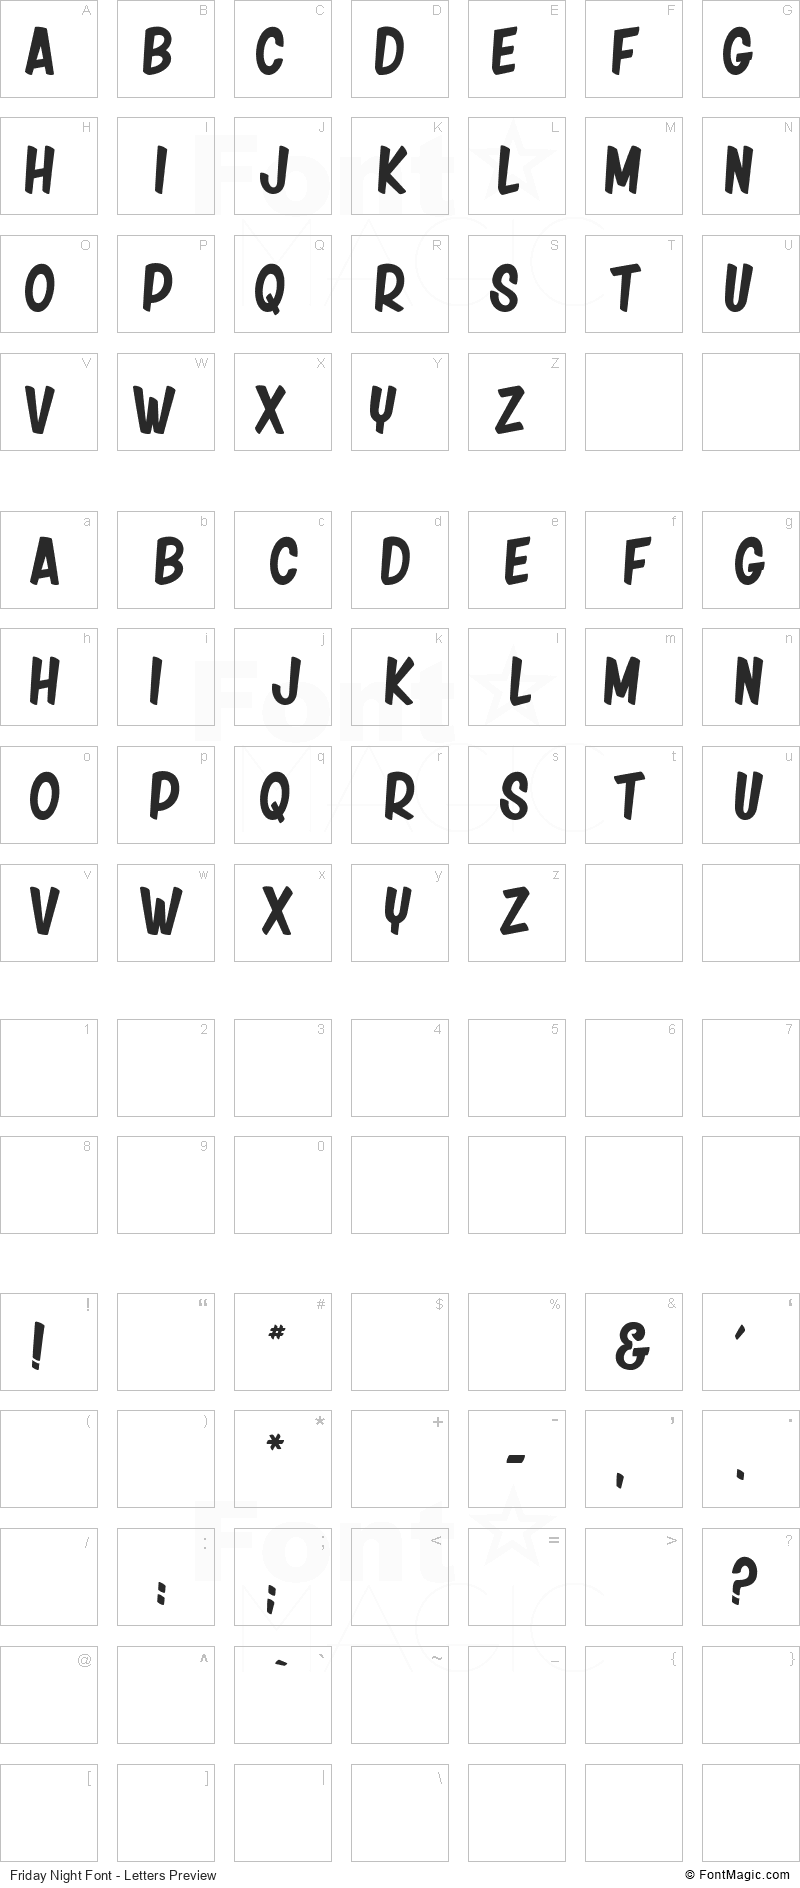 Friday Night Font - All Latters Preview Chart